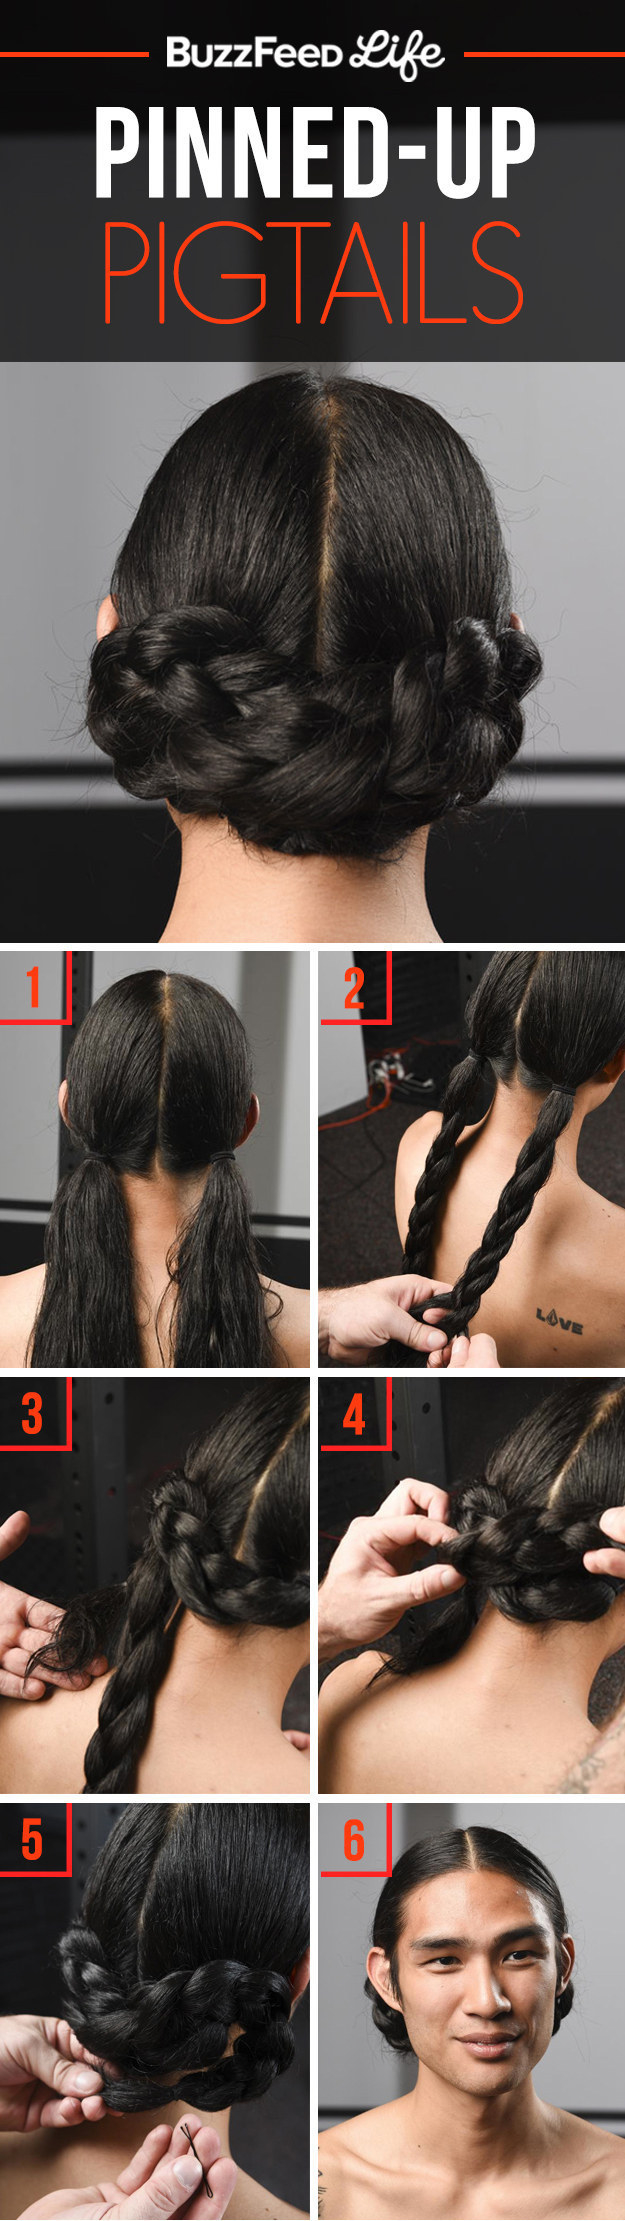 A tutorial for the pinned up braids